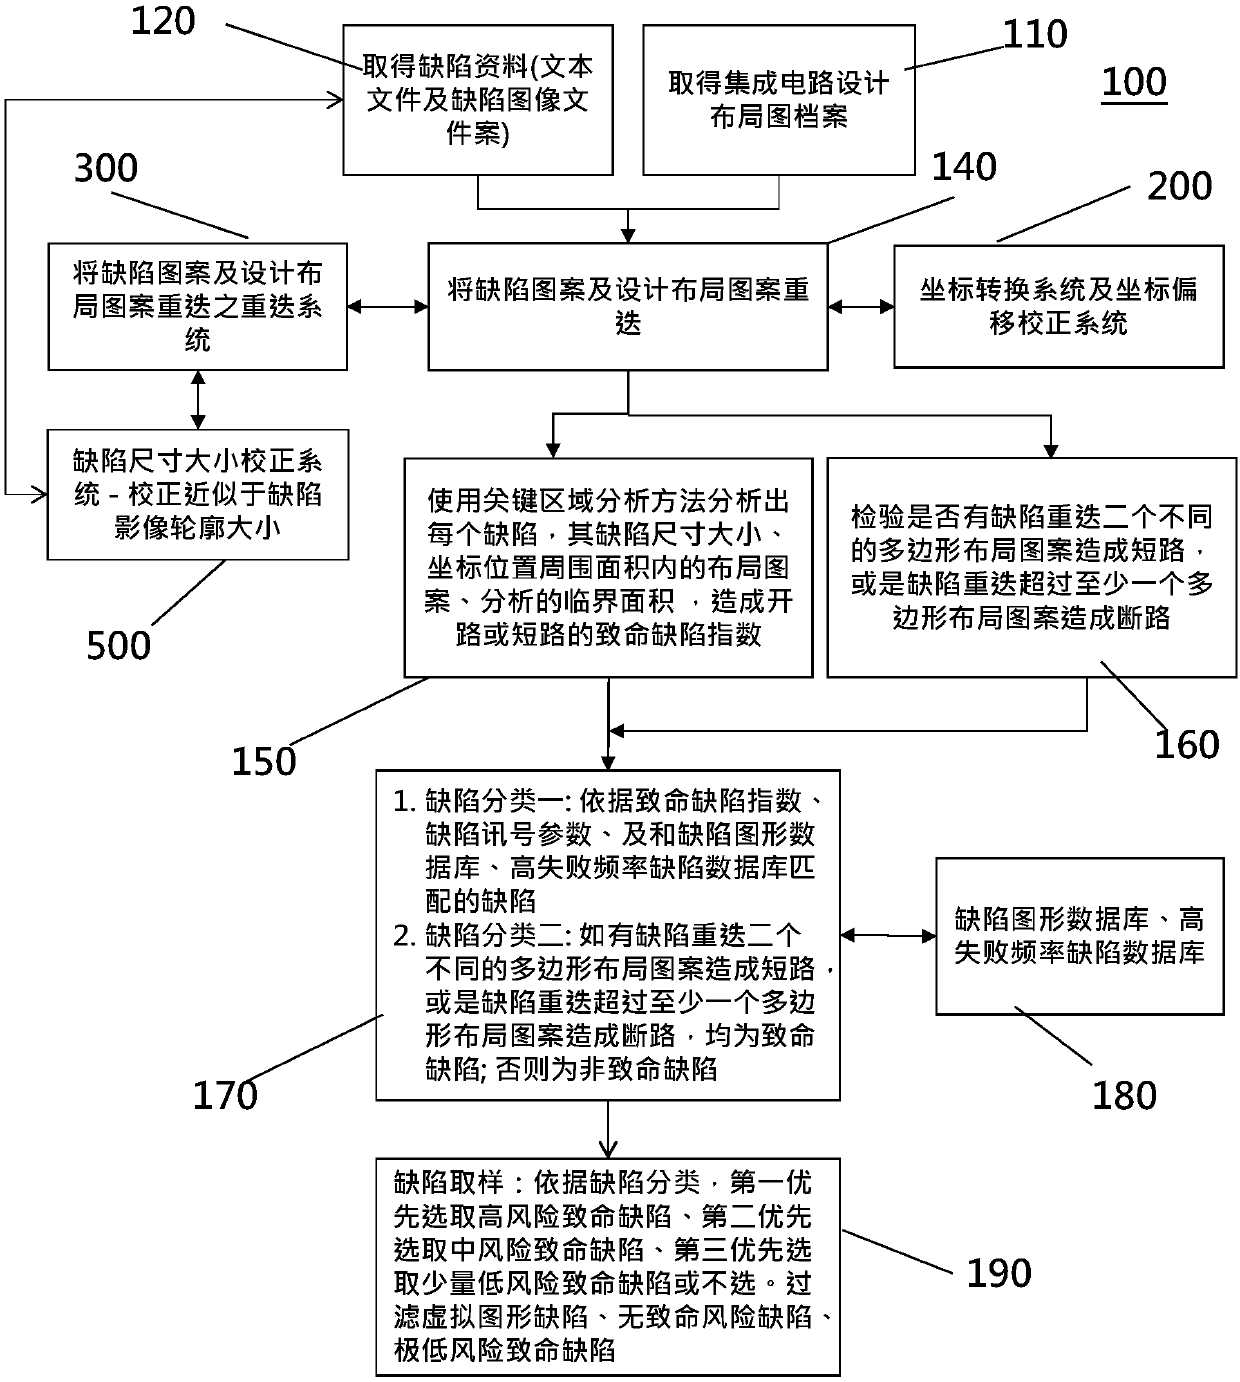 Defect operating system and device of semiconductor factory